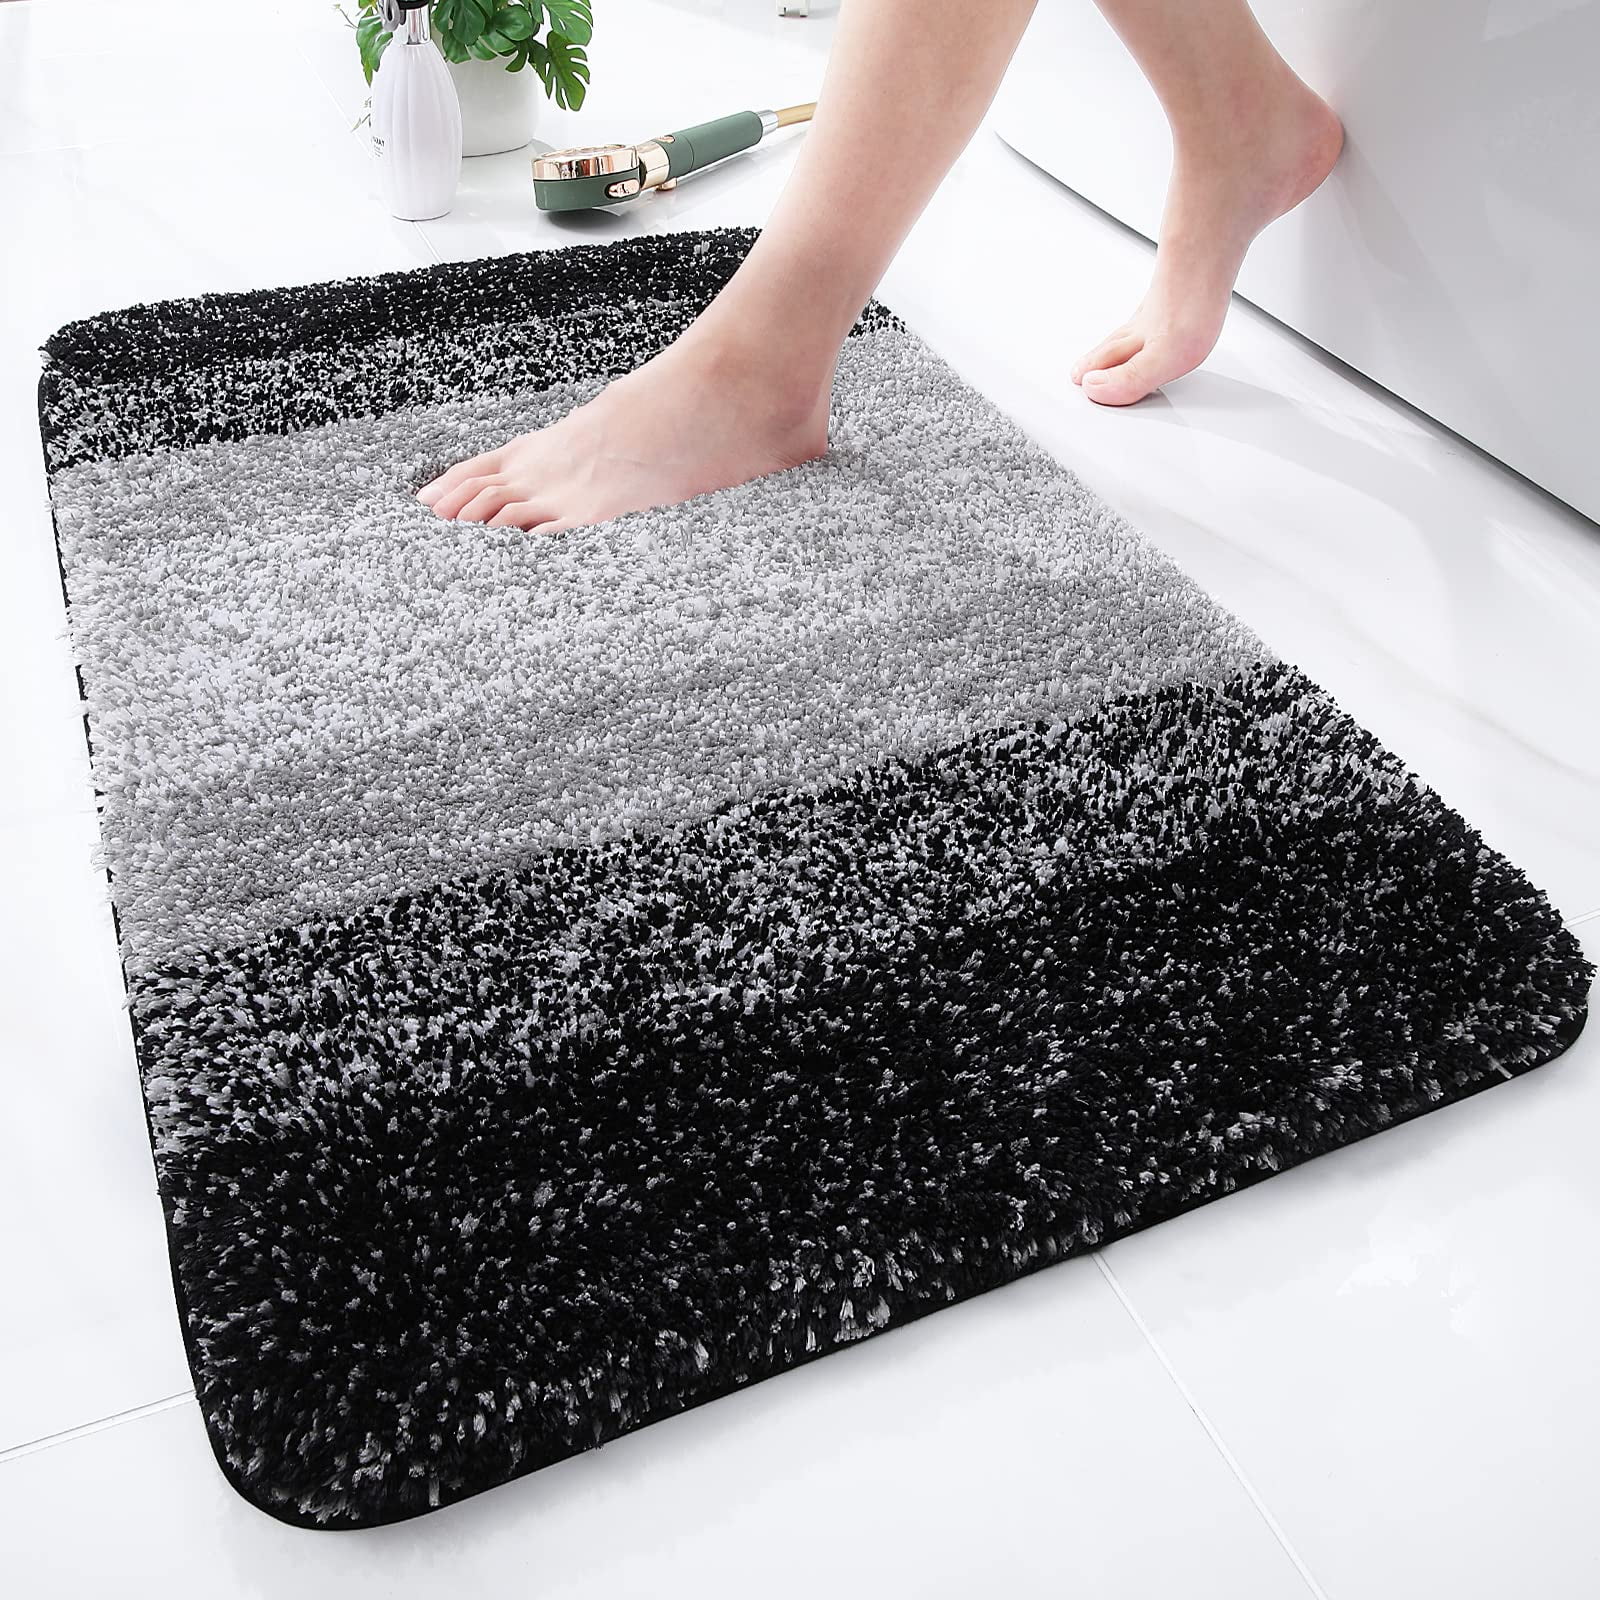 Color G Brown Bathroom Rugs - Upgrade Your Bathroom with Soft Plush Dark  Brown Microfiber Bath Mat - Non Slip, Absorbent, Washable, Quick Dry,  24”x36”